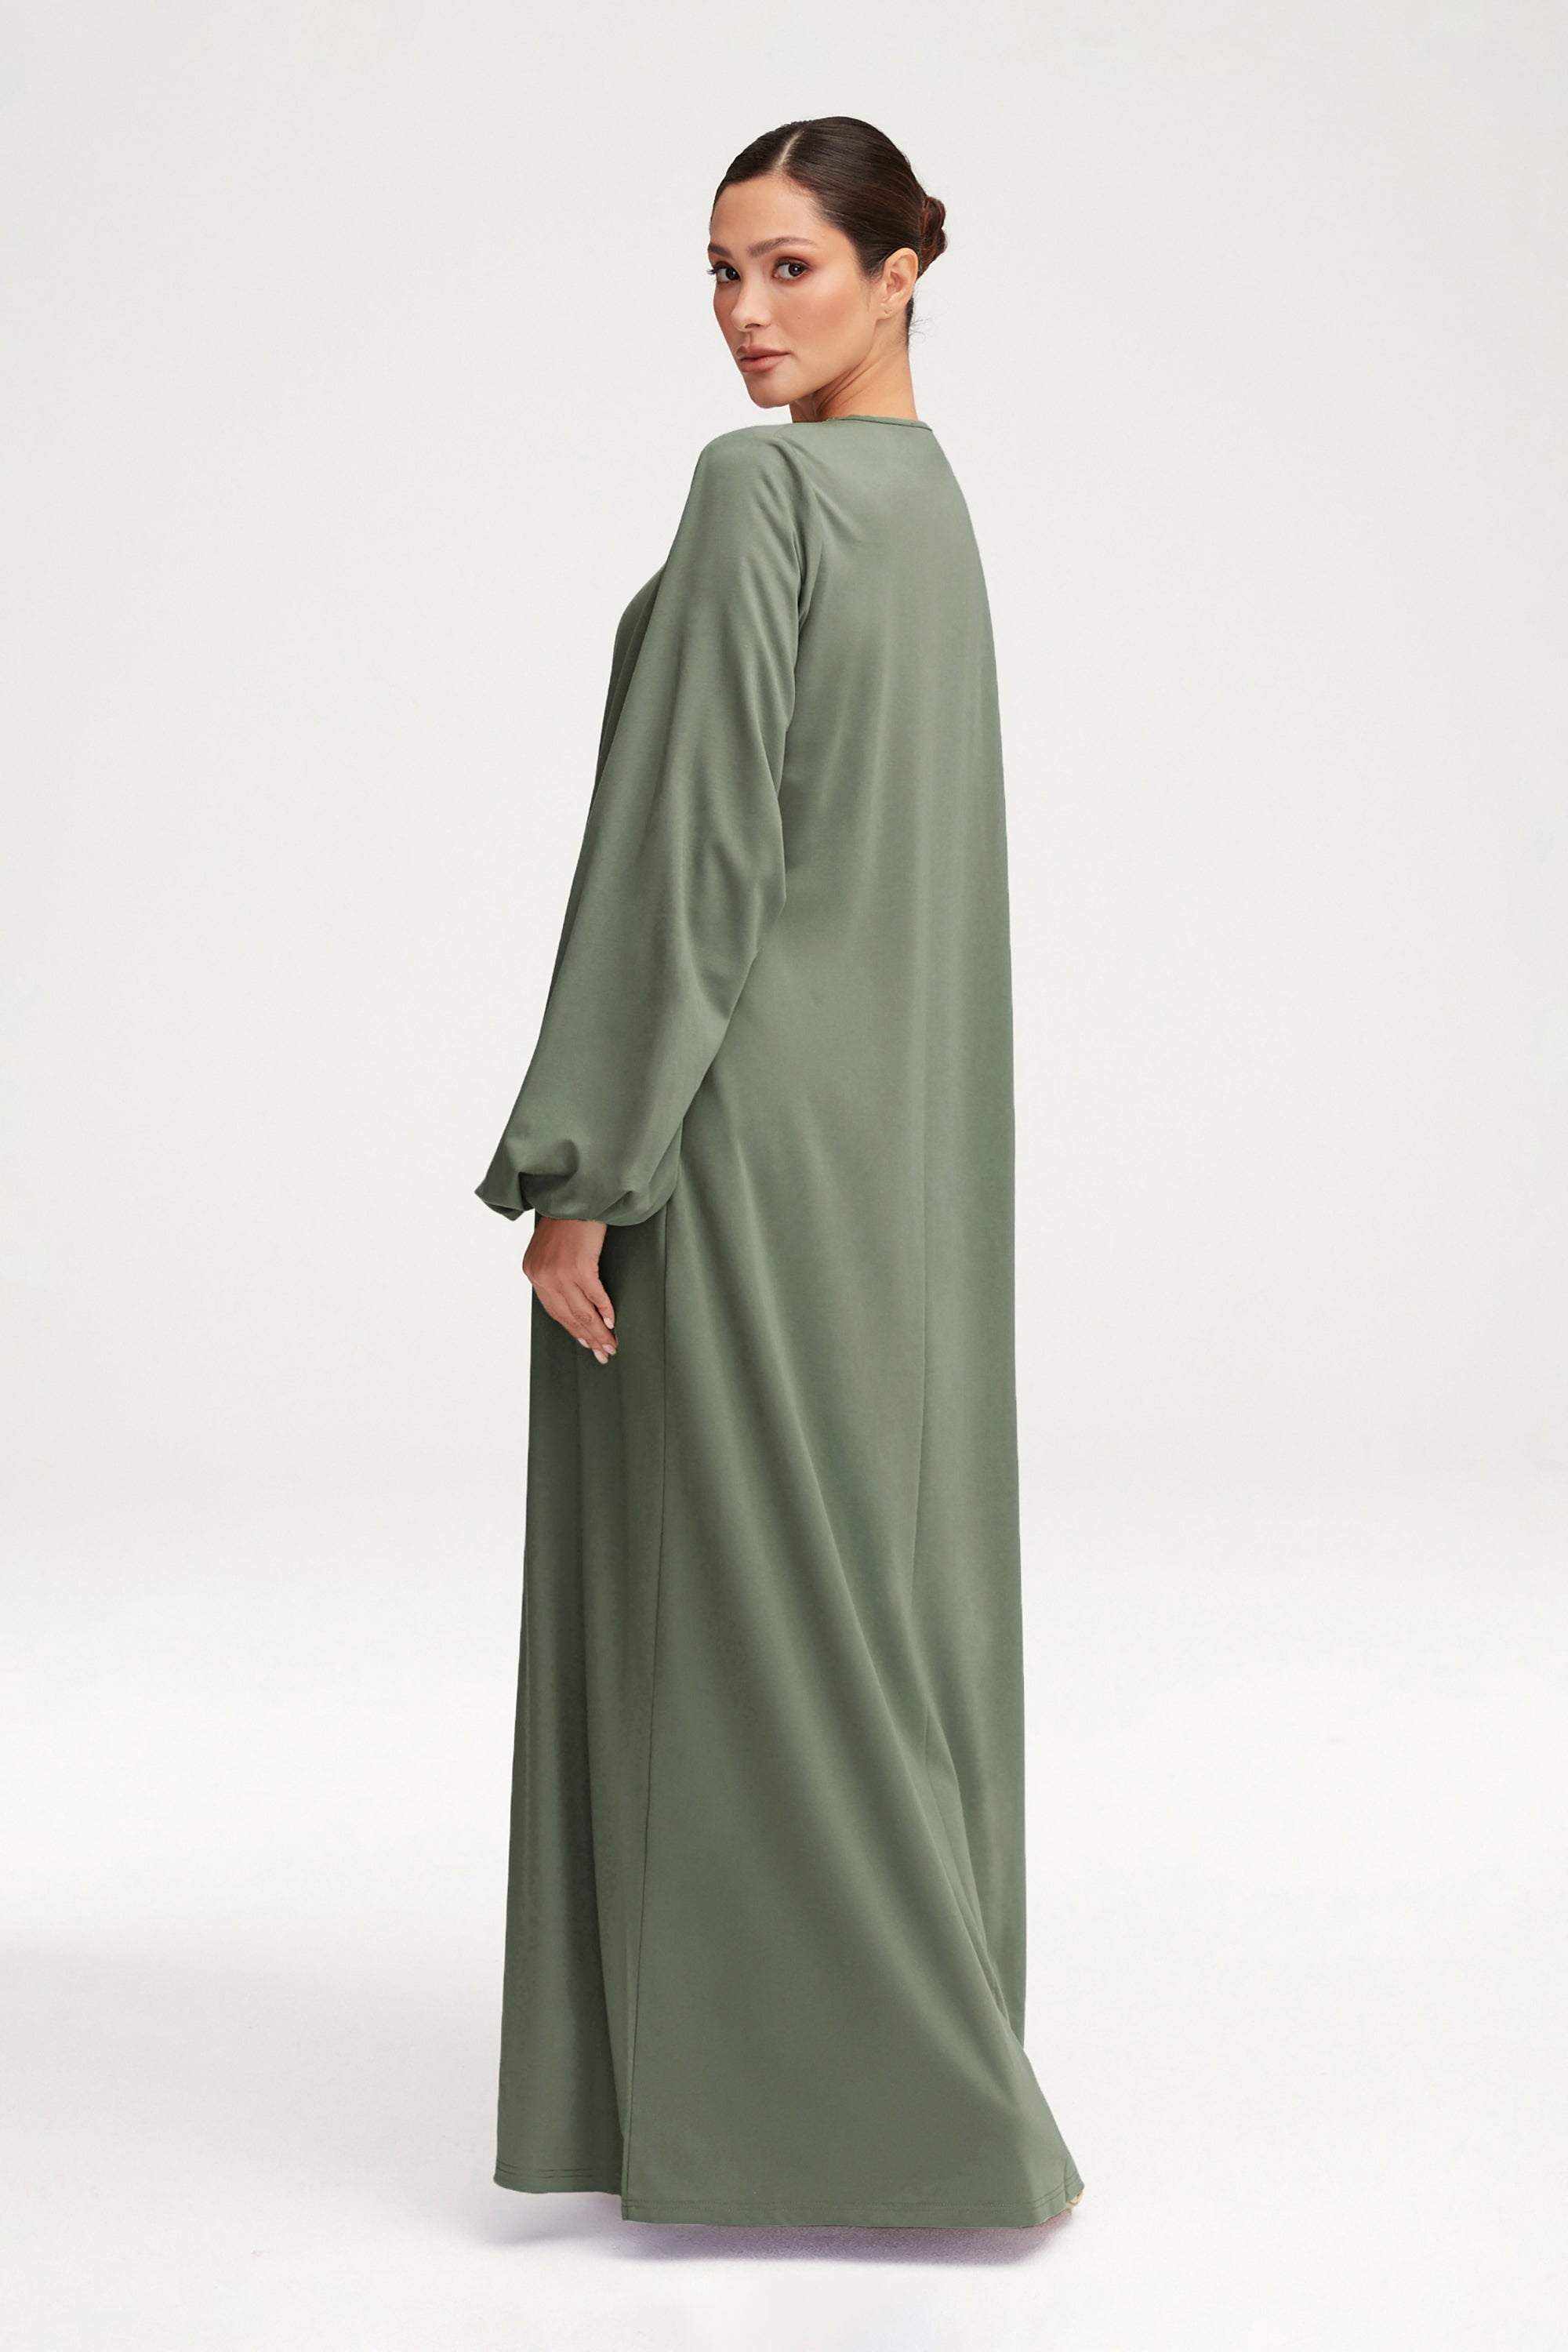 Essential Jersey Open Abaya - Sage Clothing Veiled 